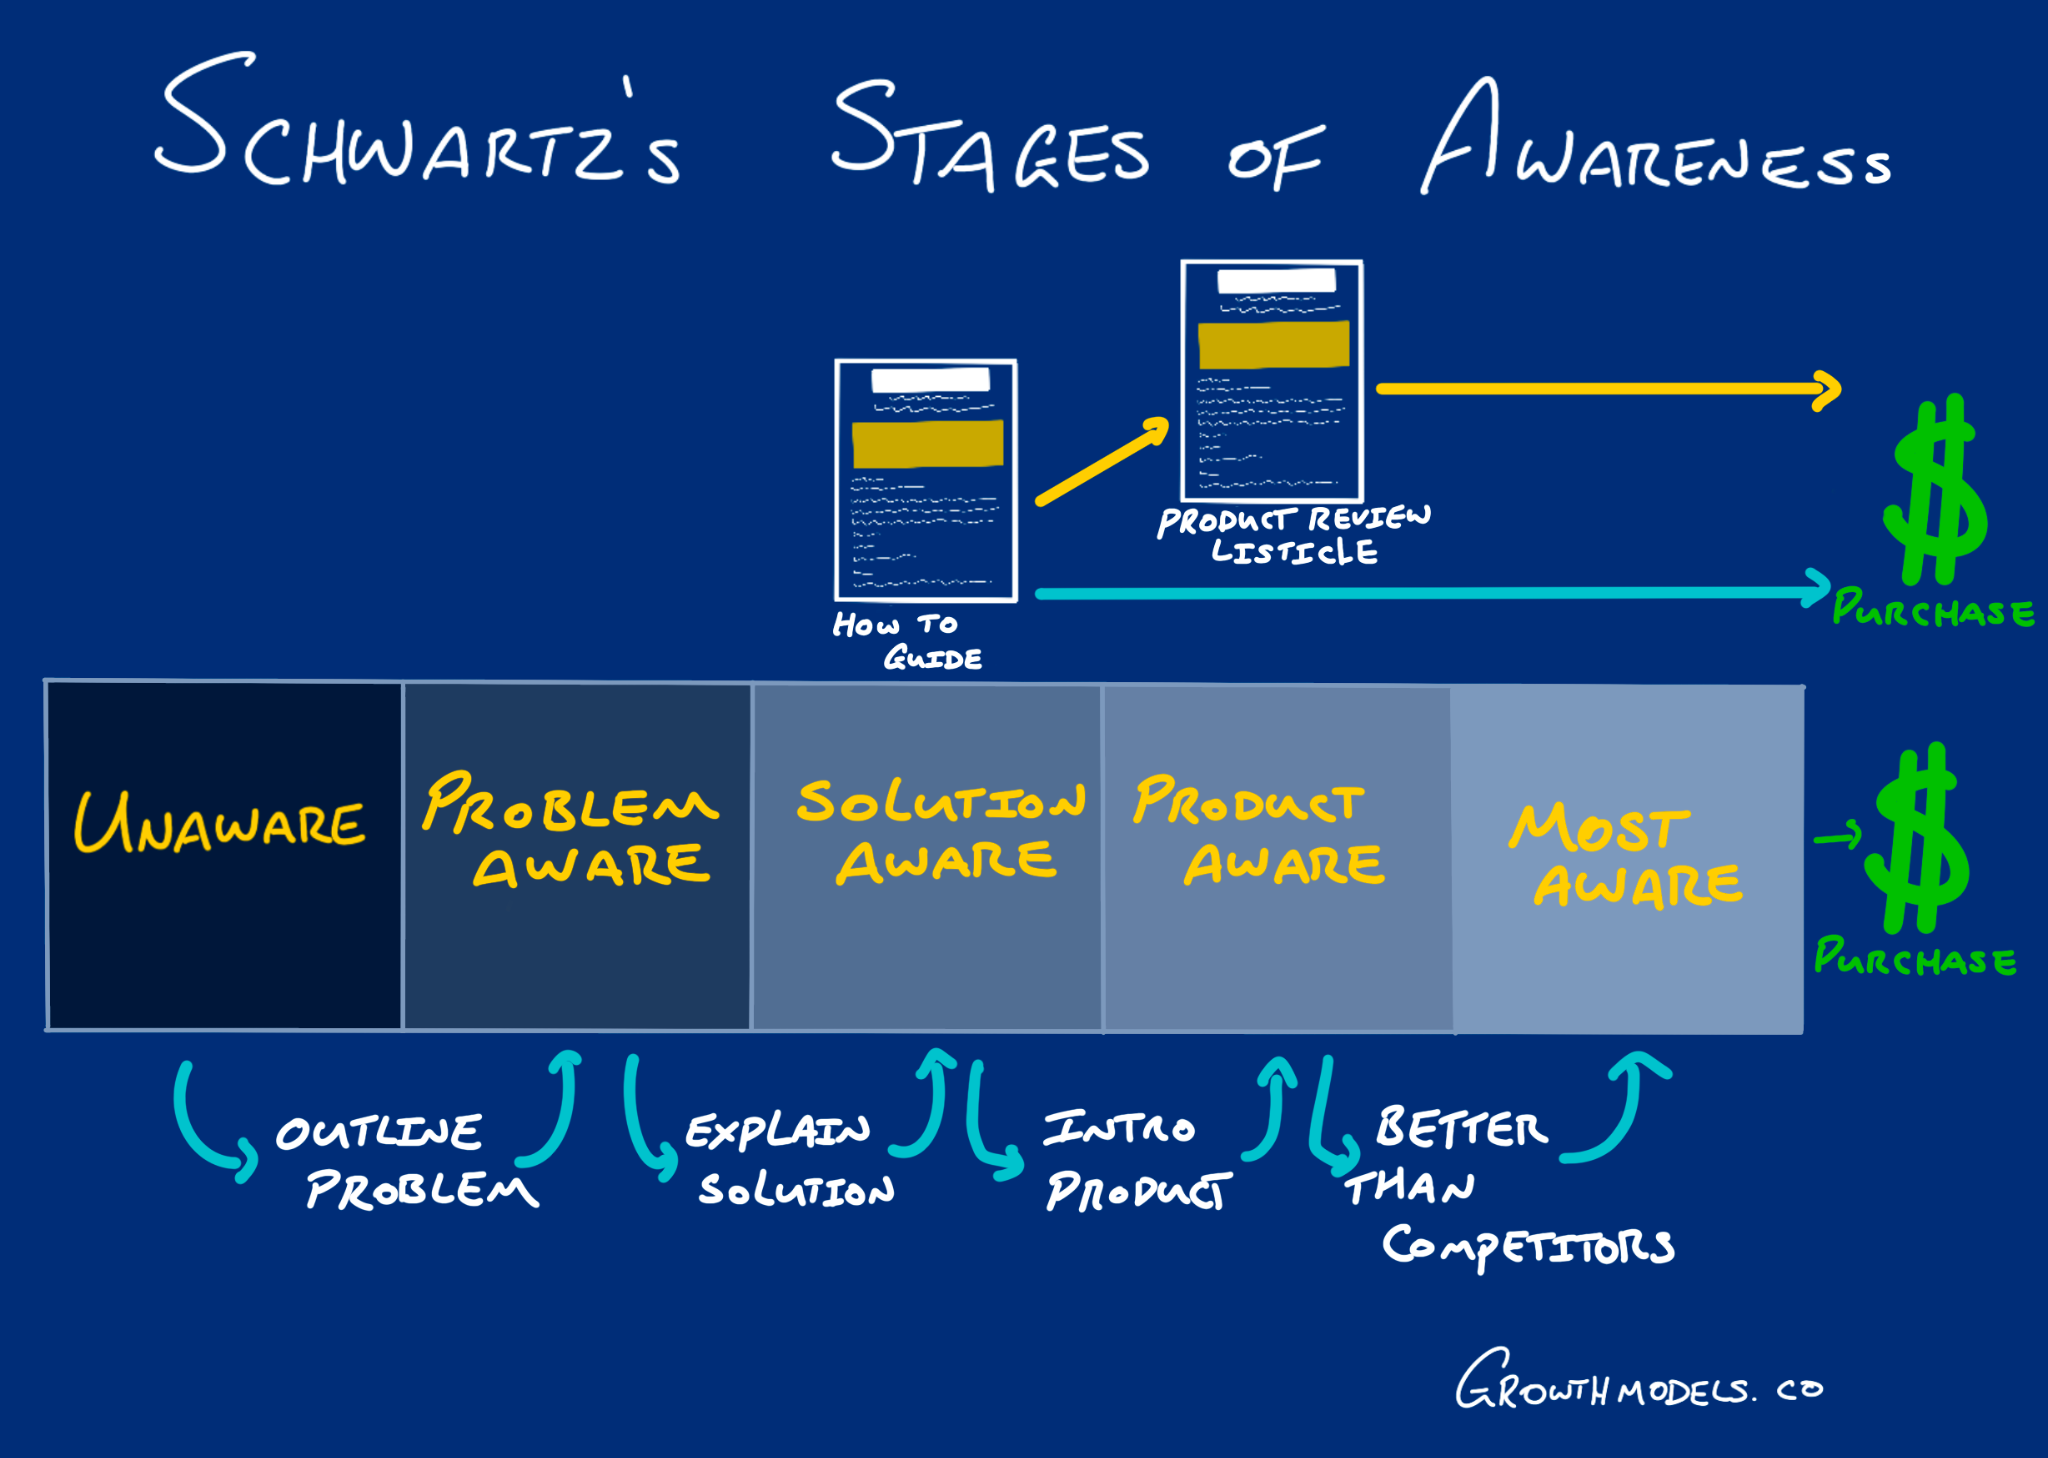 The stages of awareness